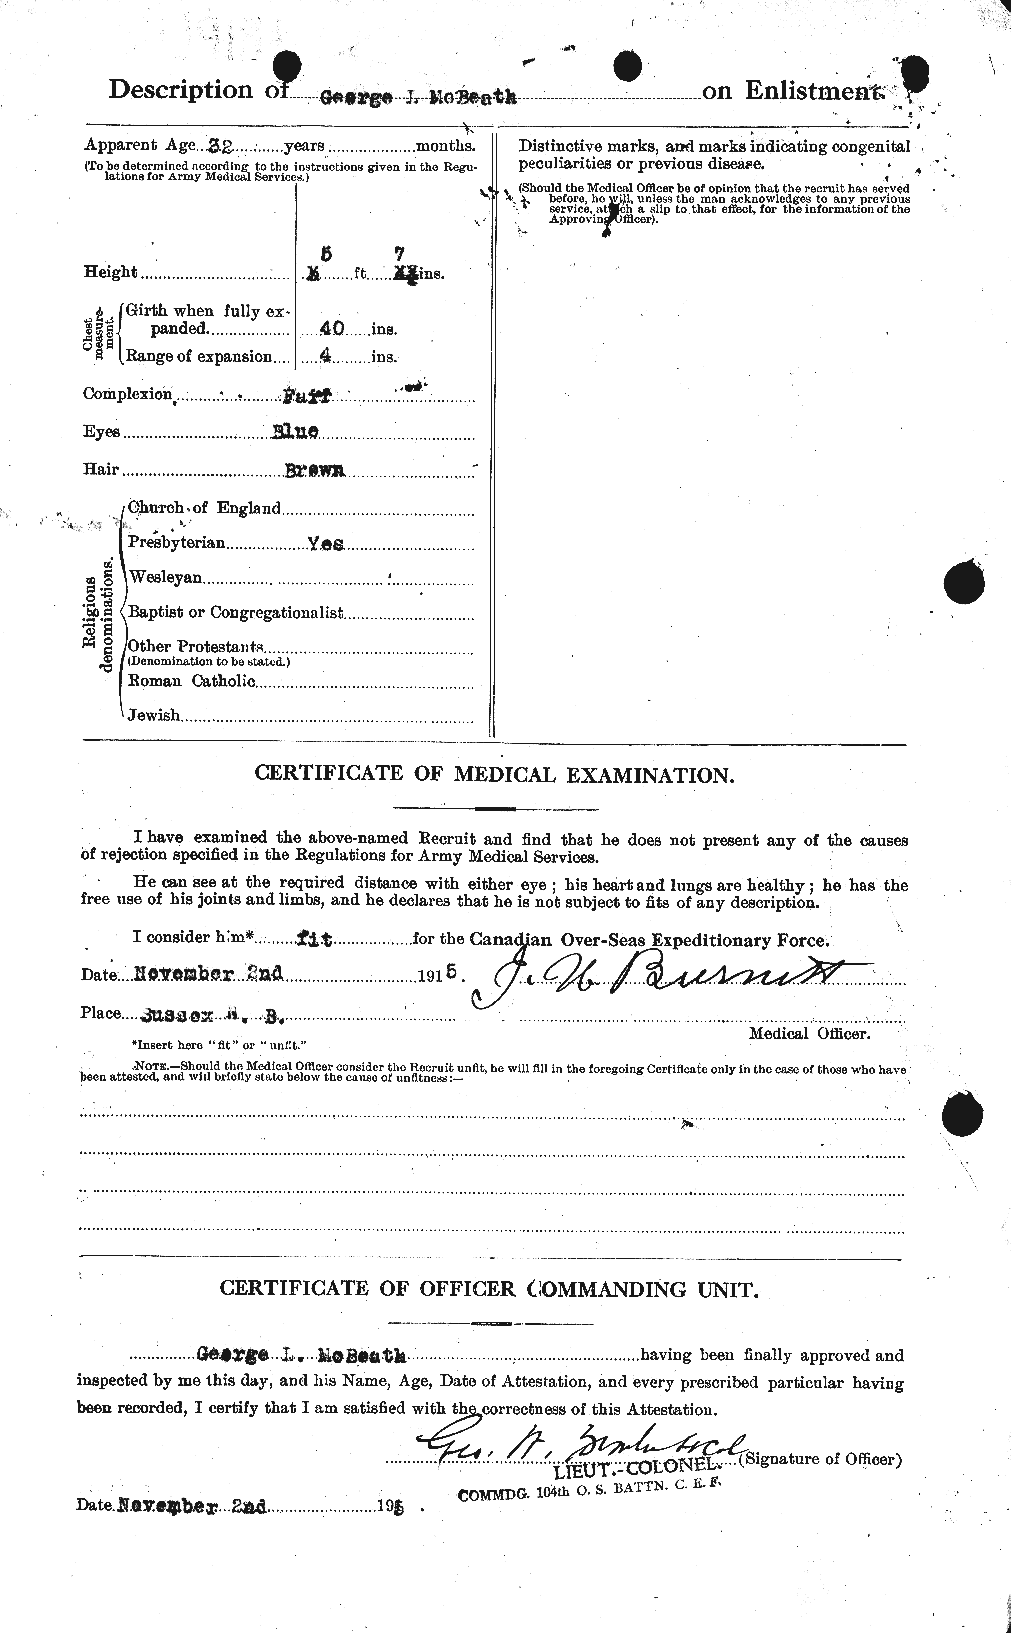 Personnel Records of the First World War - CEF 132385b